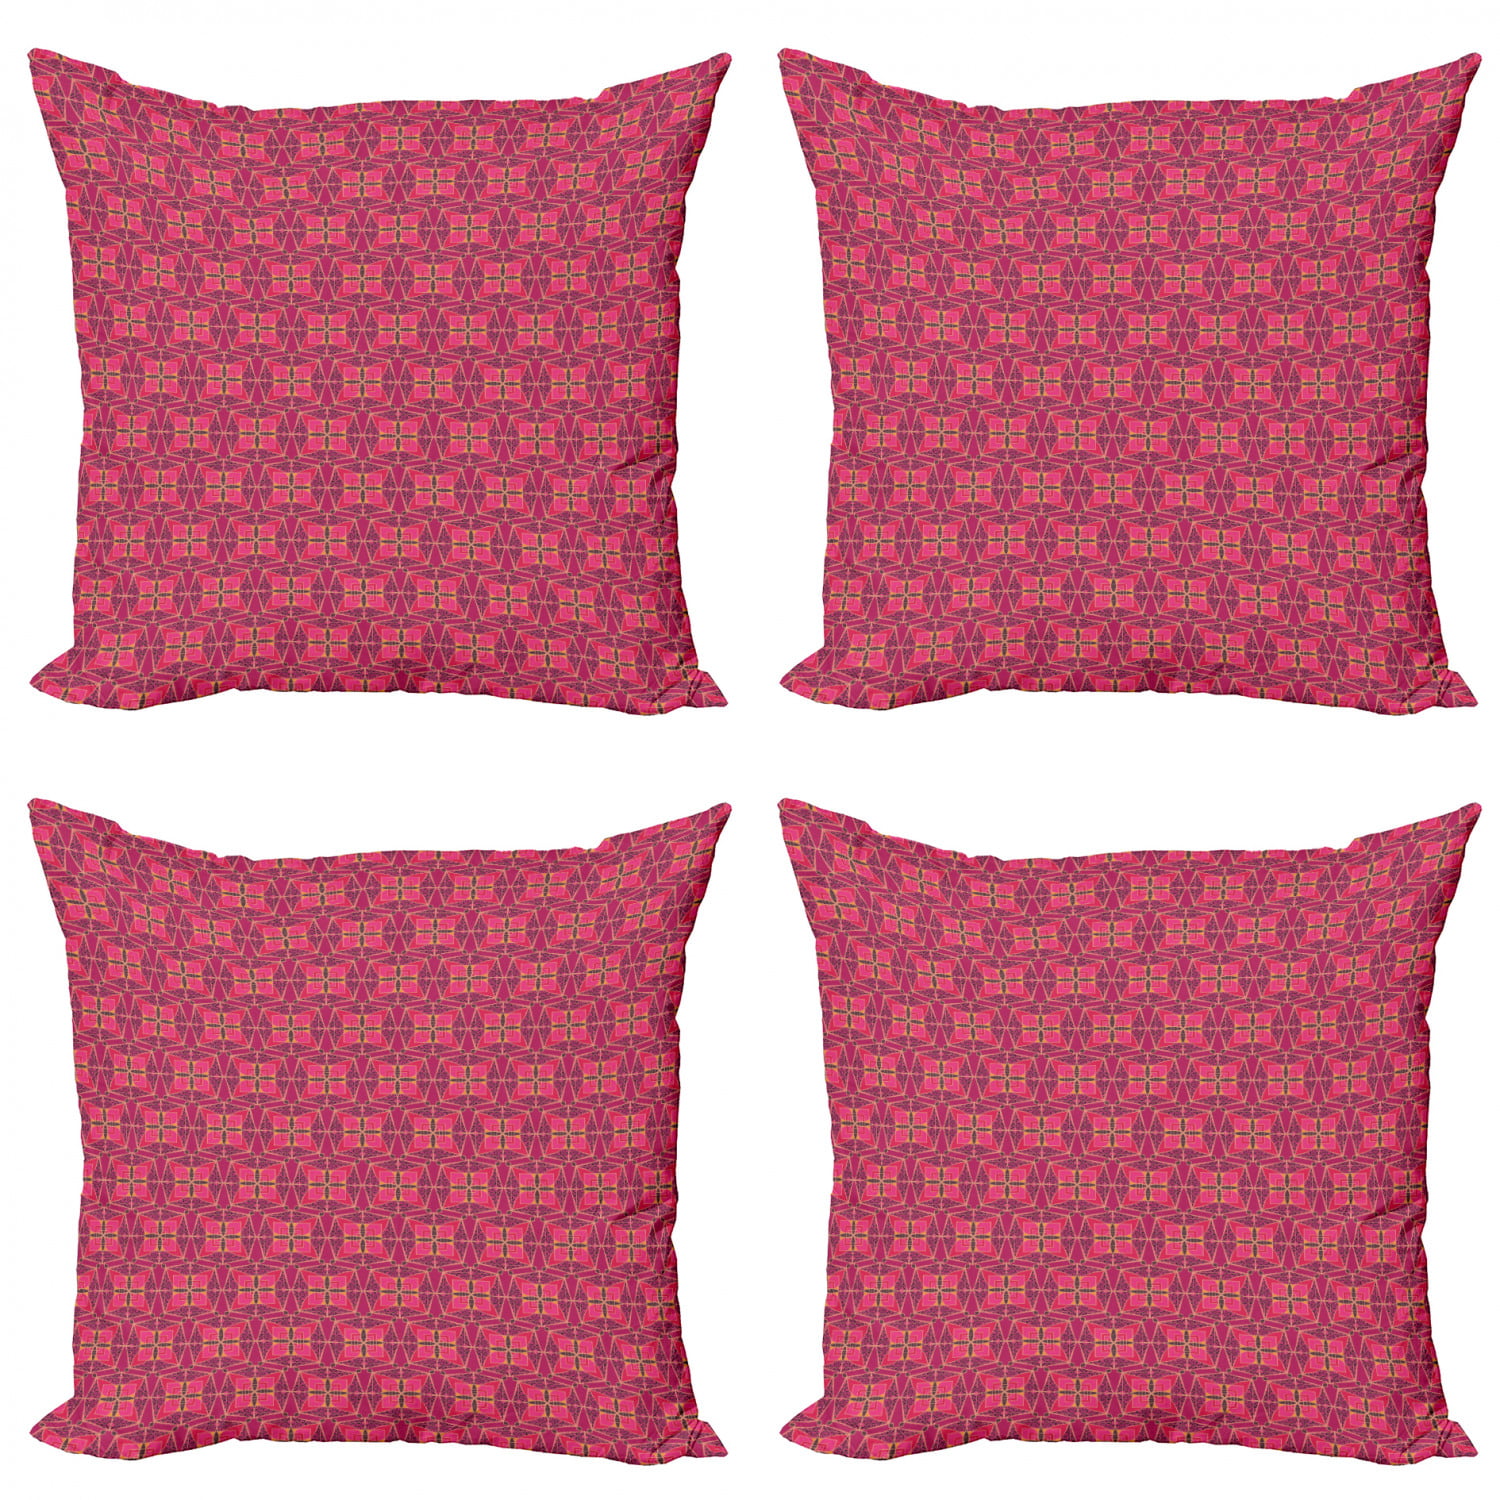 Decorative Standard Size Printed Pillowcase Ambesonne Moroccan Pillow Sham Art in Times Checkered Pattern with Abstract Pinkish Motifs 26 X 20 Marigold Magenta